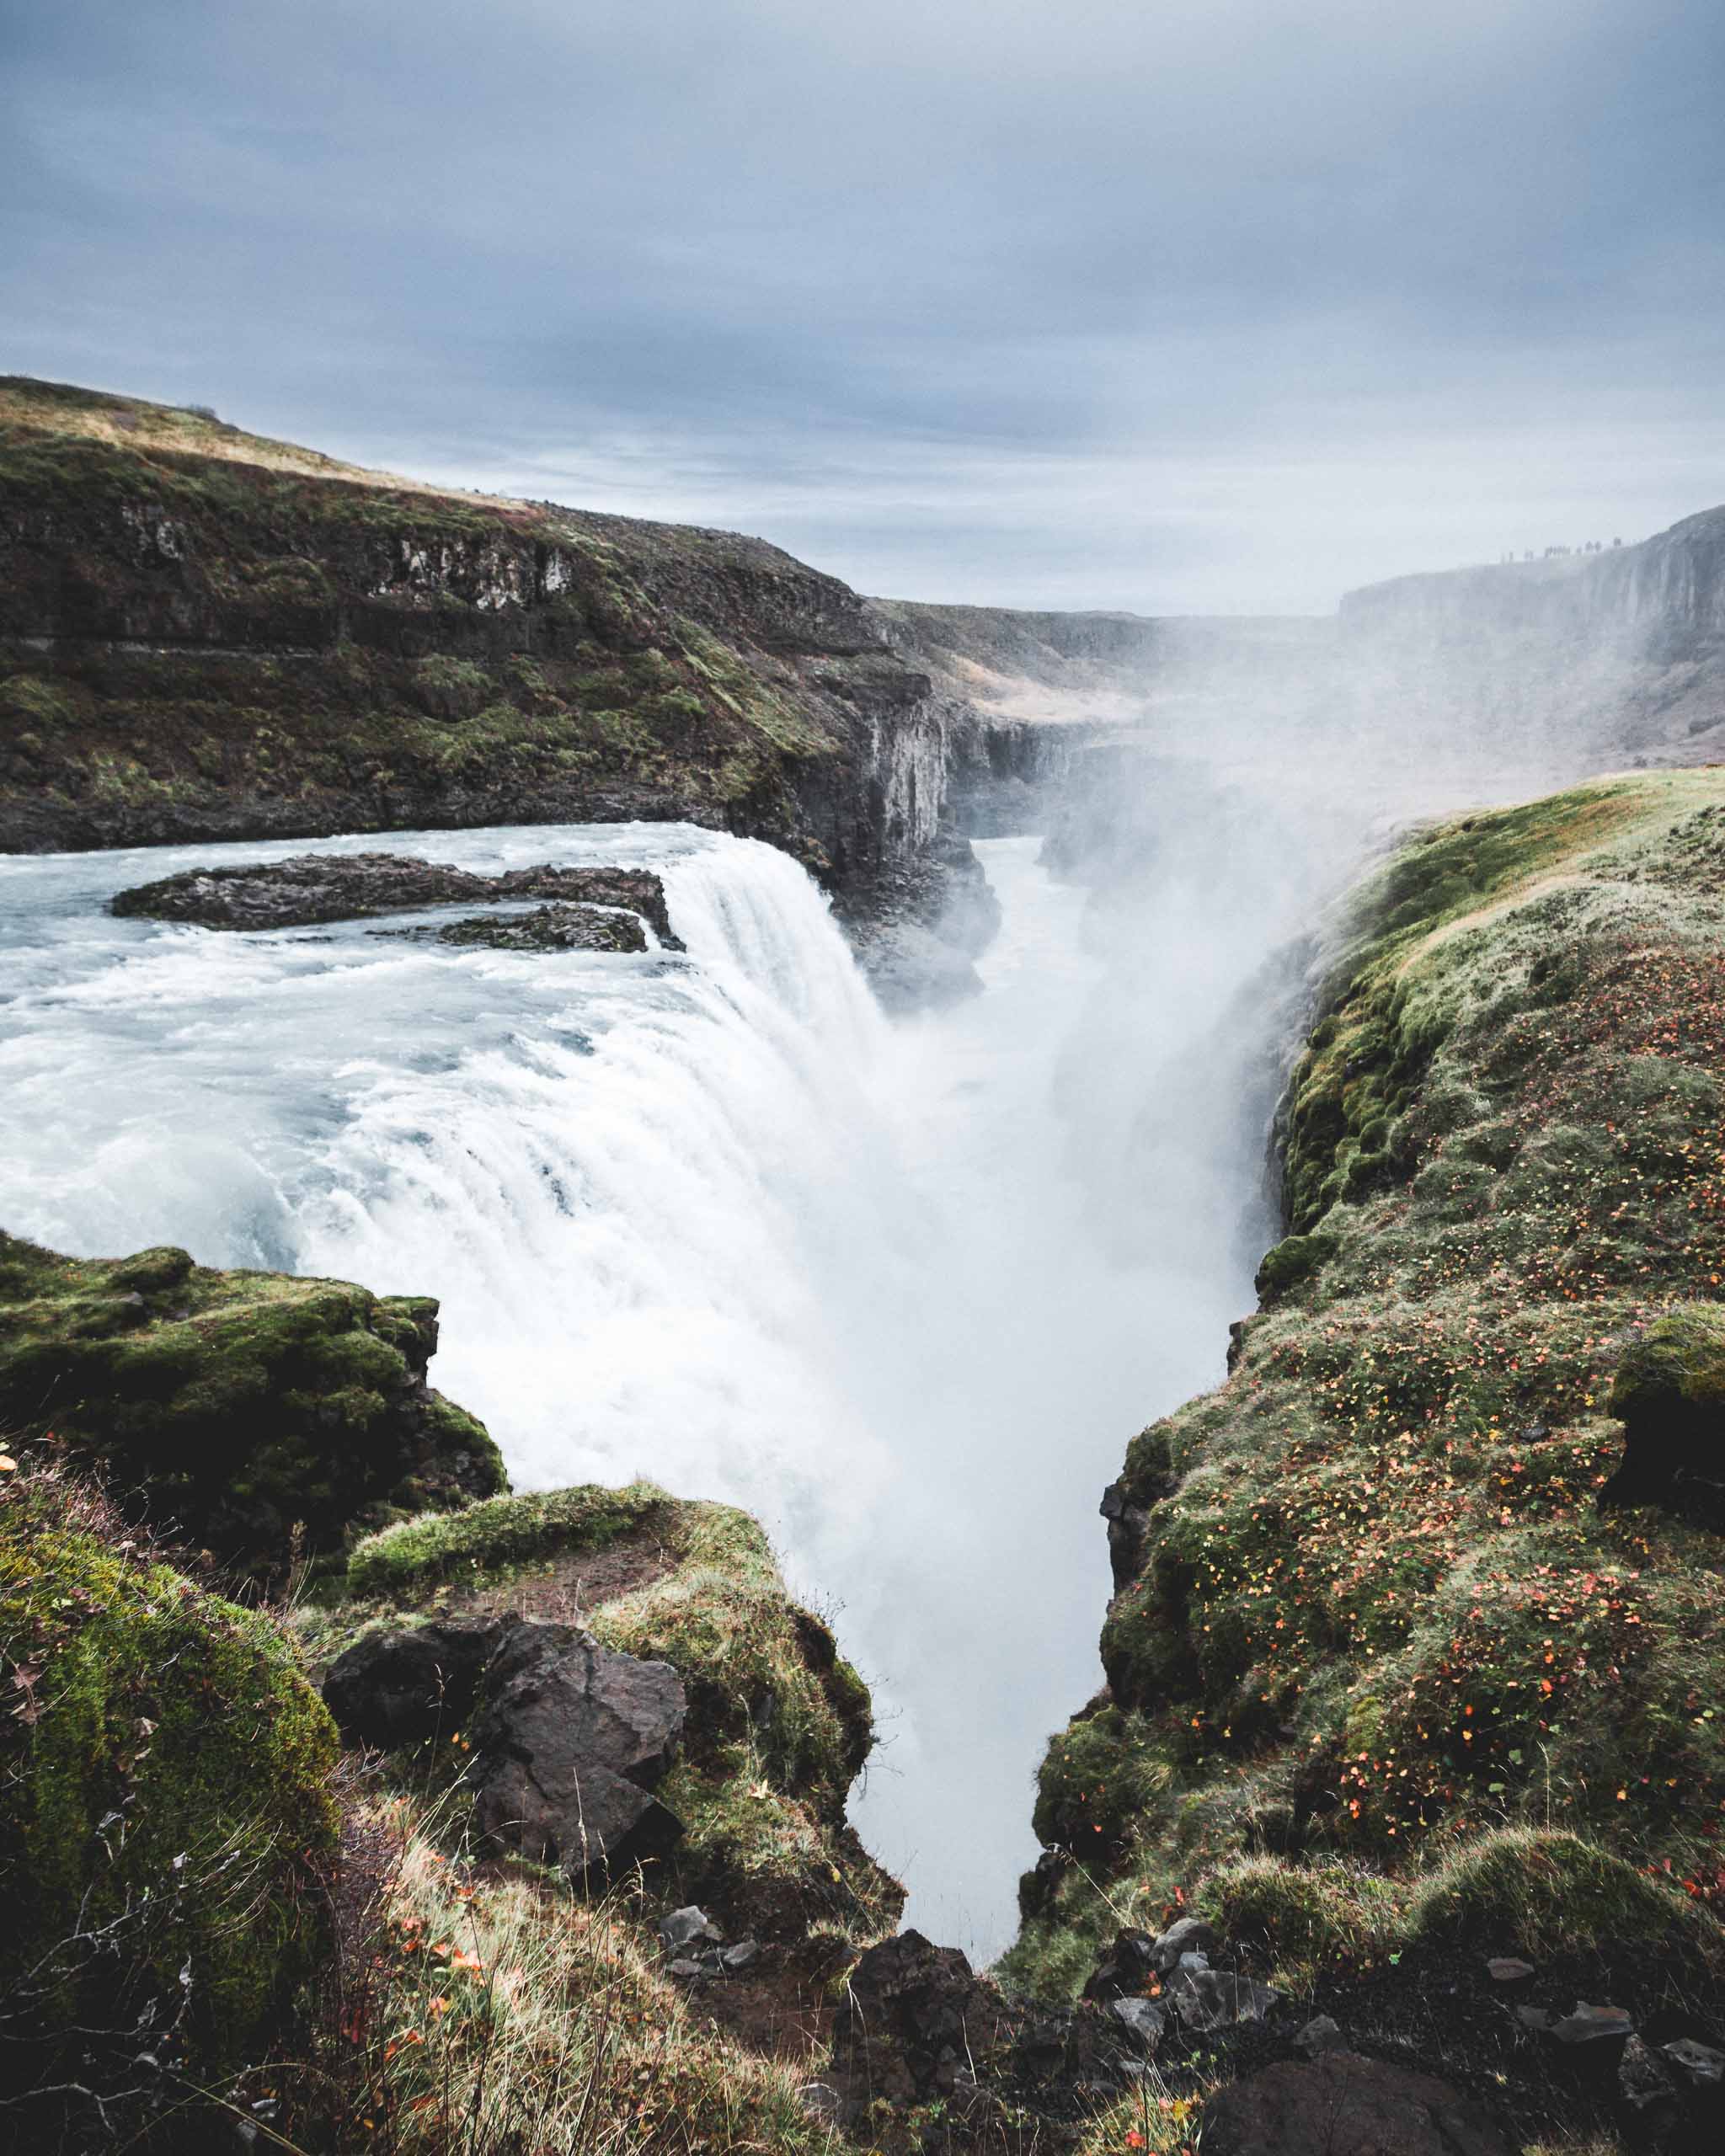 Gullfoss waterfall can be shot from many different angles.